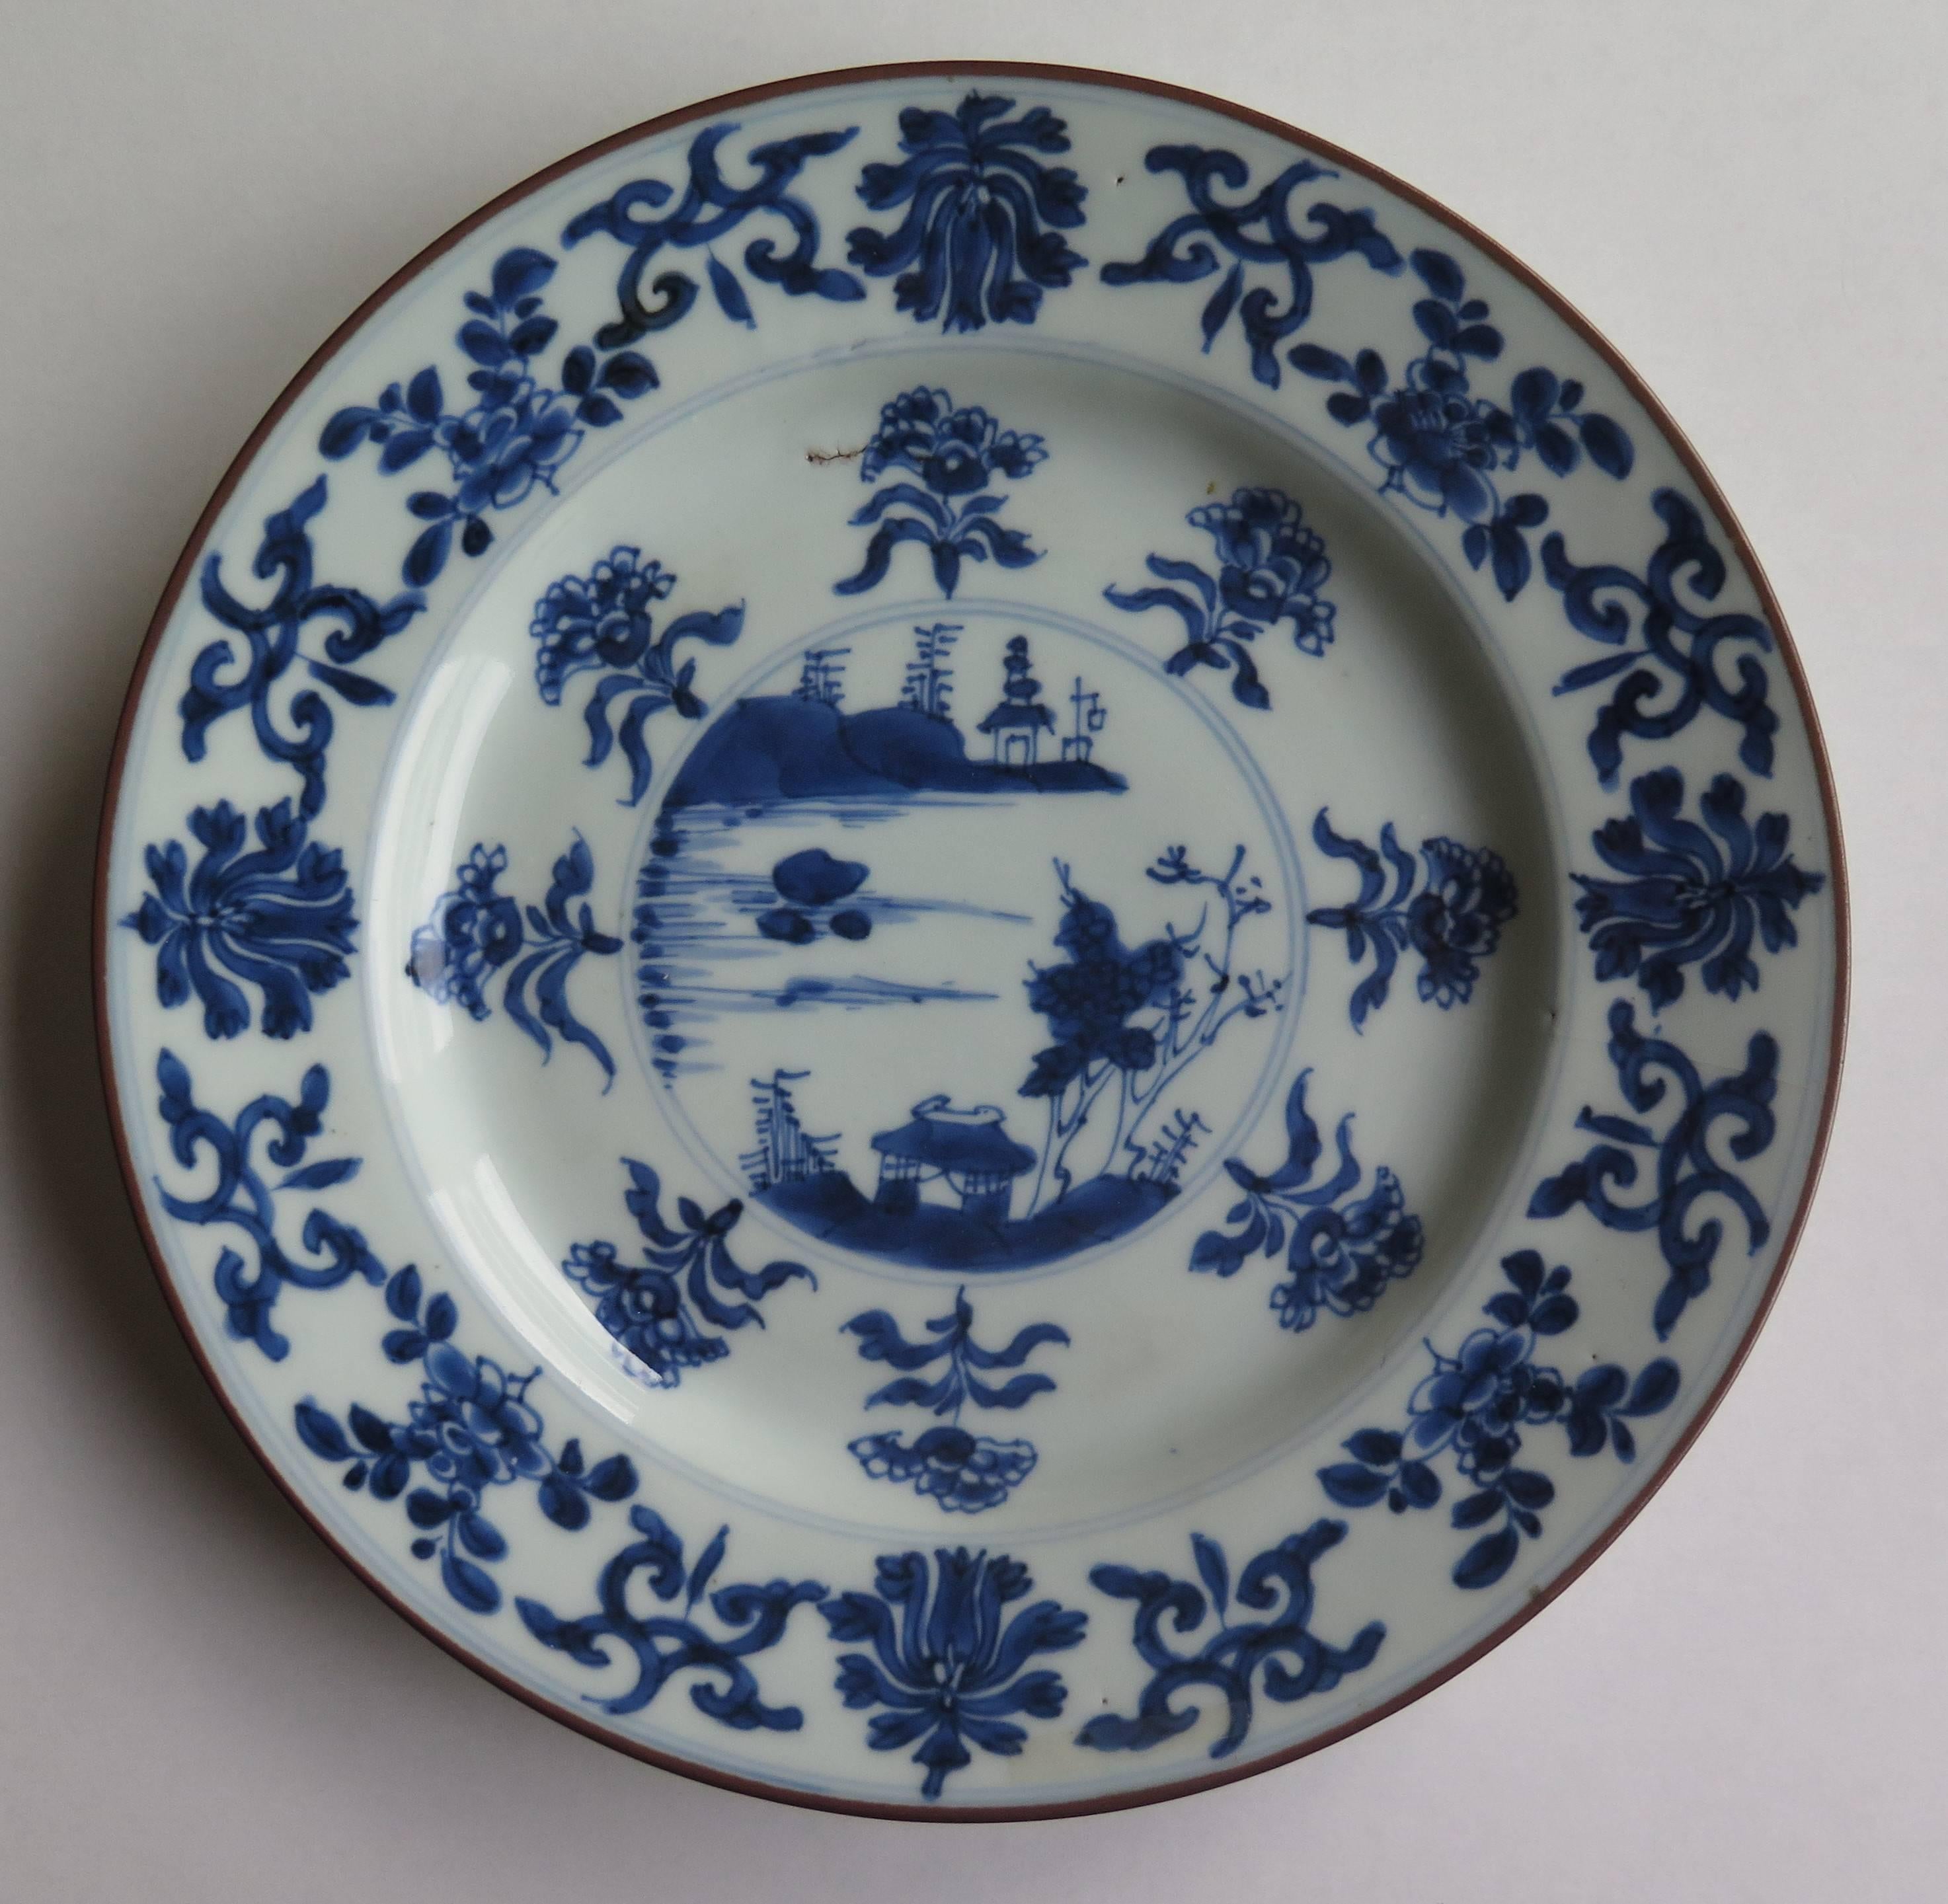 This is a thinly potted, fine hand-painted Chinese porcelain plate.

The glaze is thin and glassy with the decoration in varying shades of a cold steely cobalt blue. 

The outer rim and outer well are decorated with an eight set multi-foliate